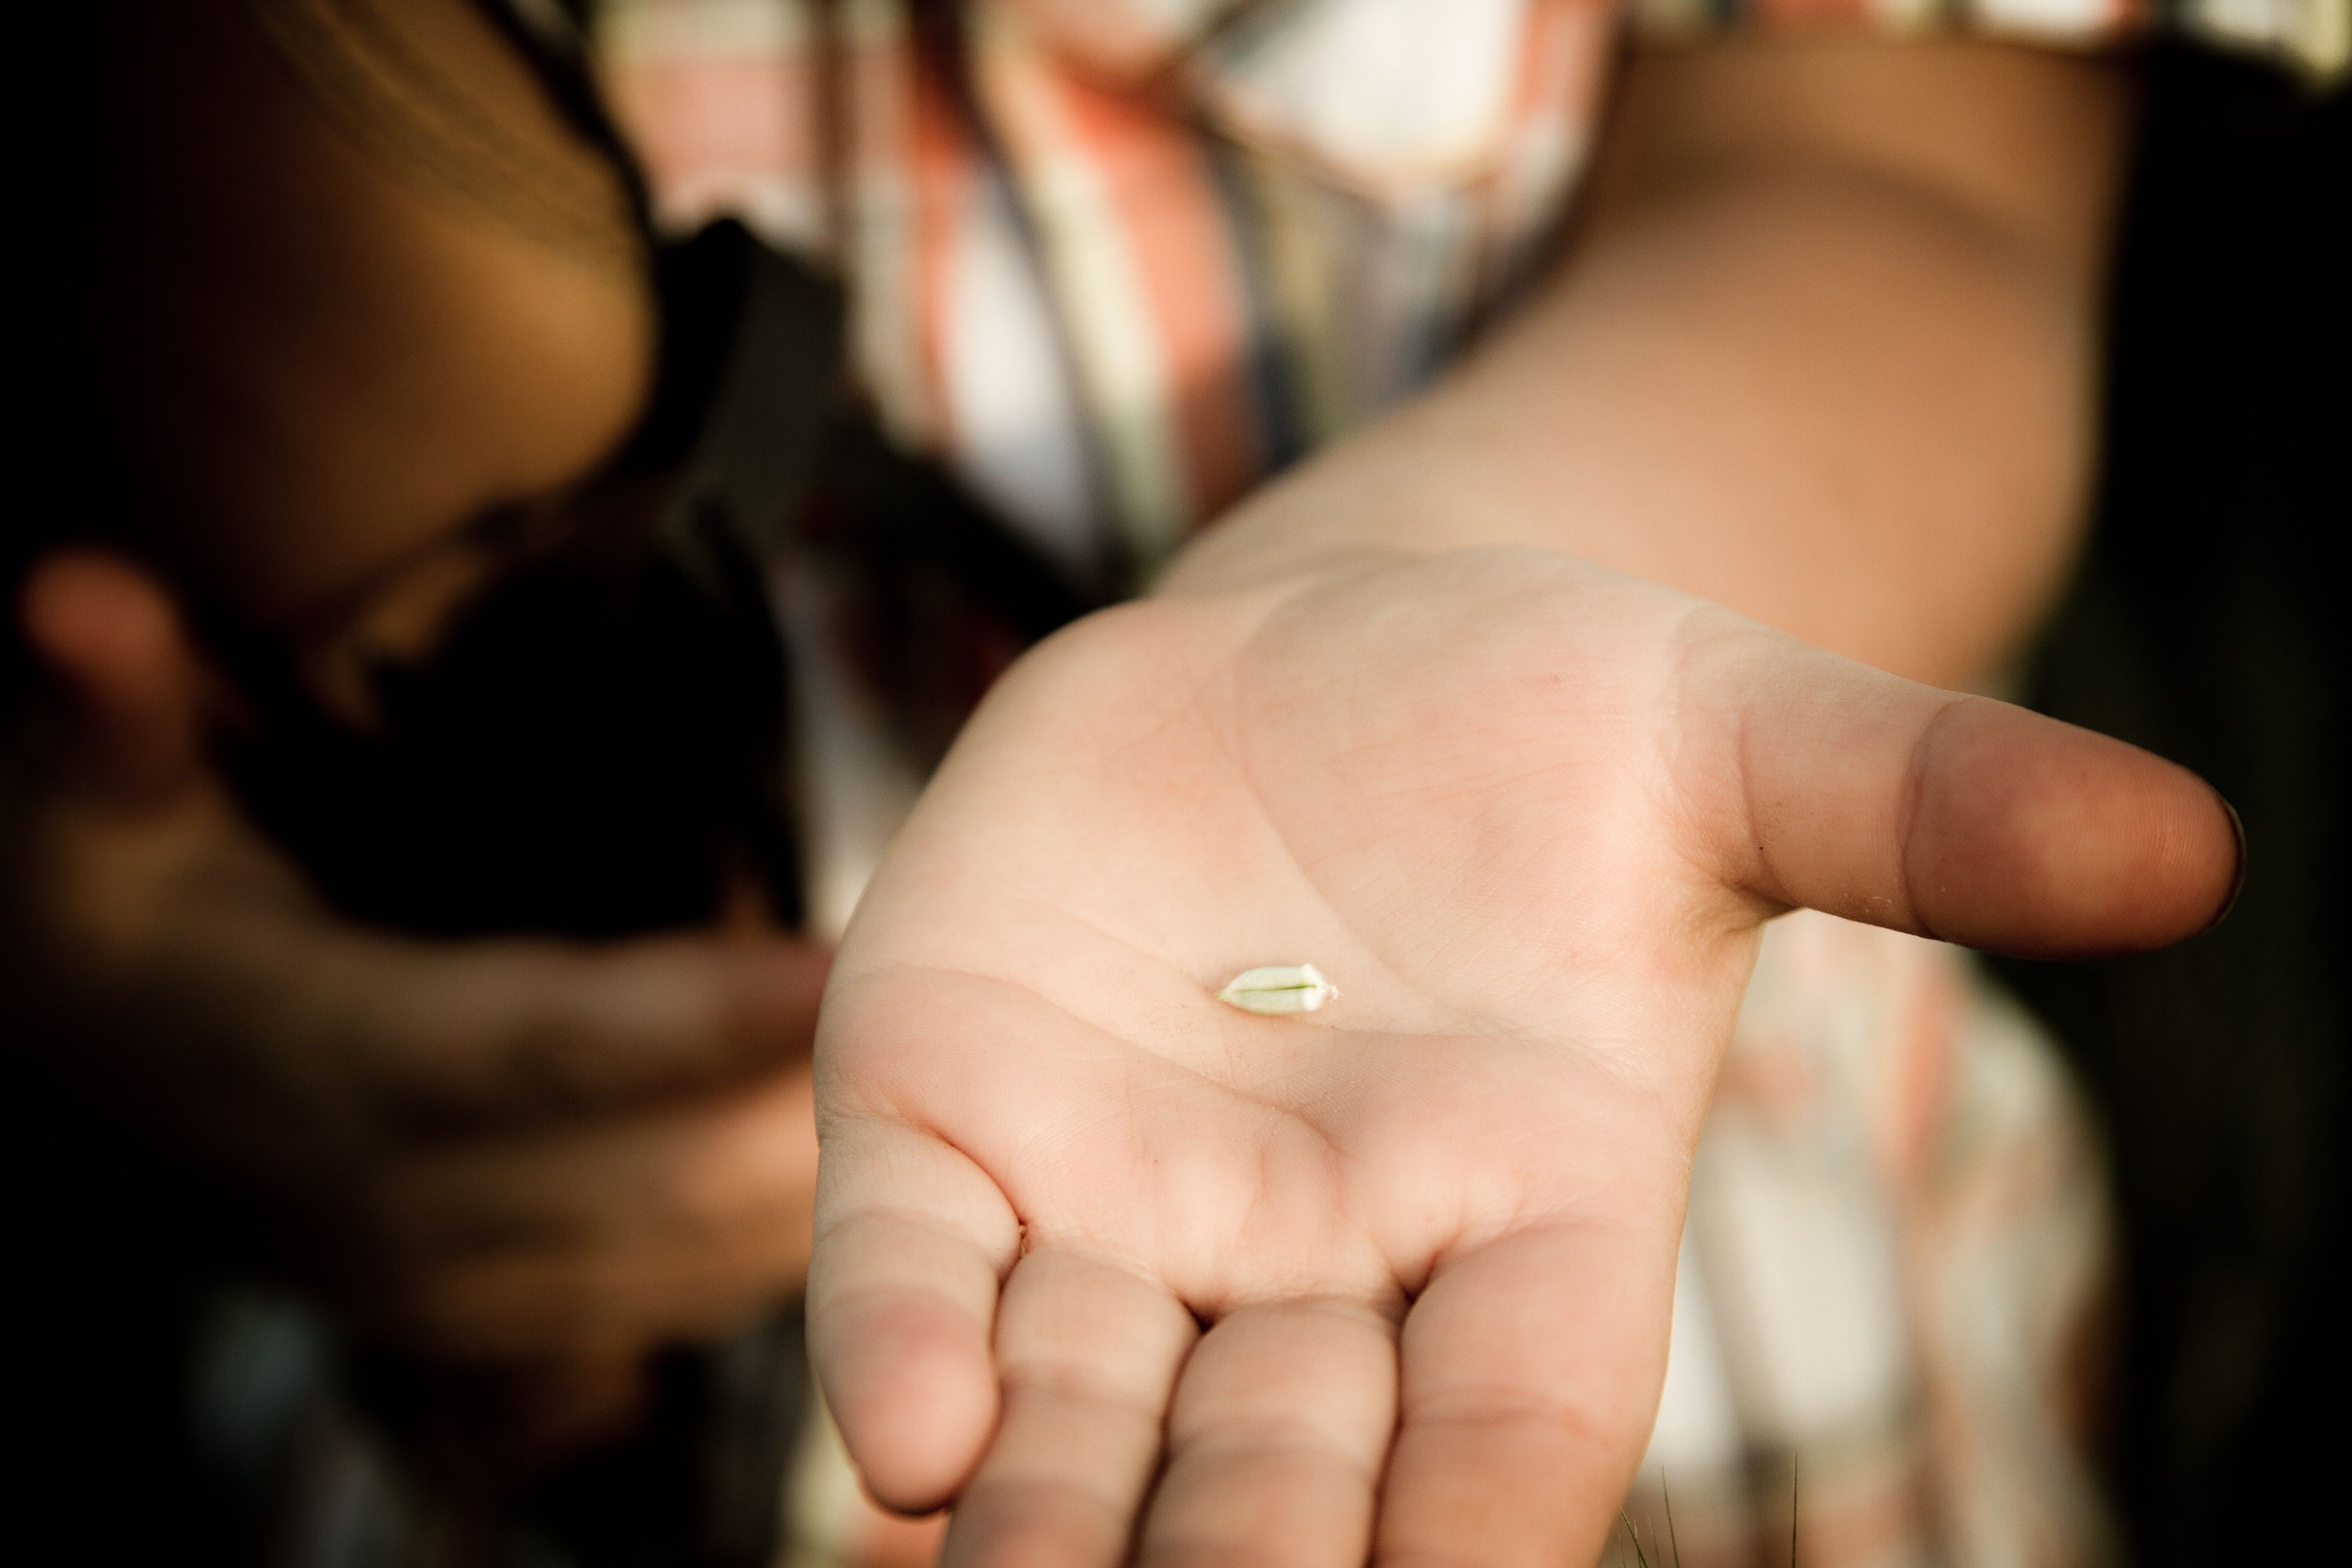 A seed in a child’s hand.